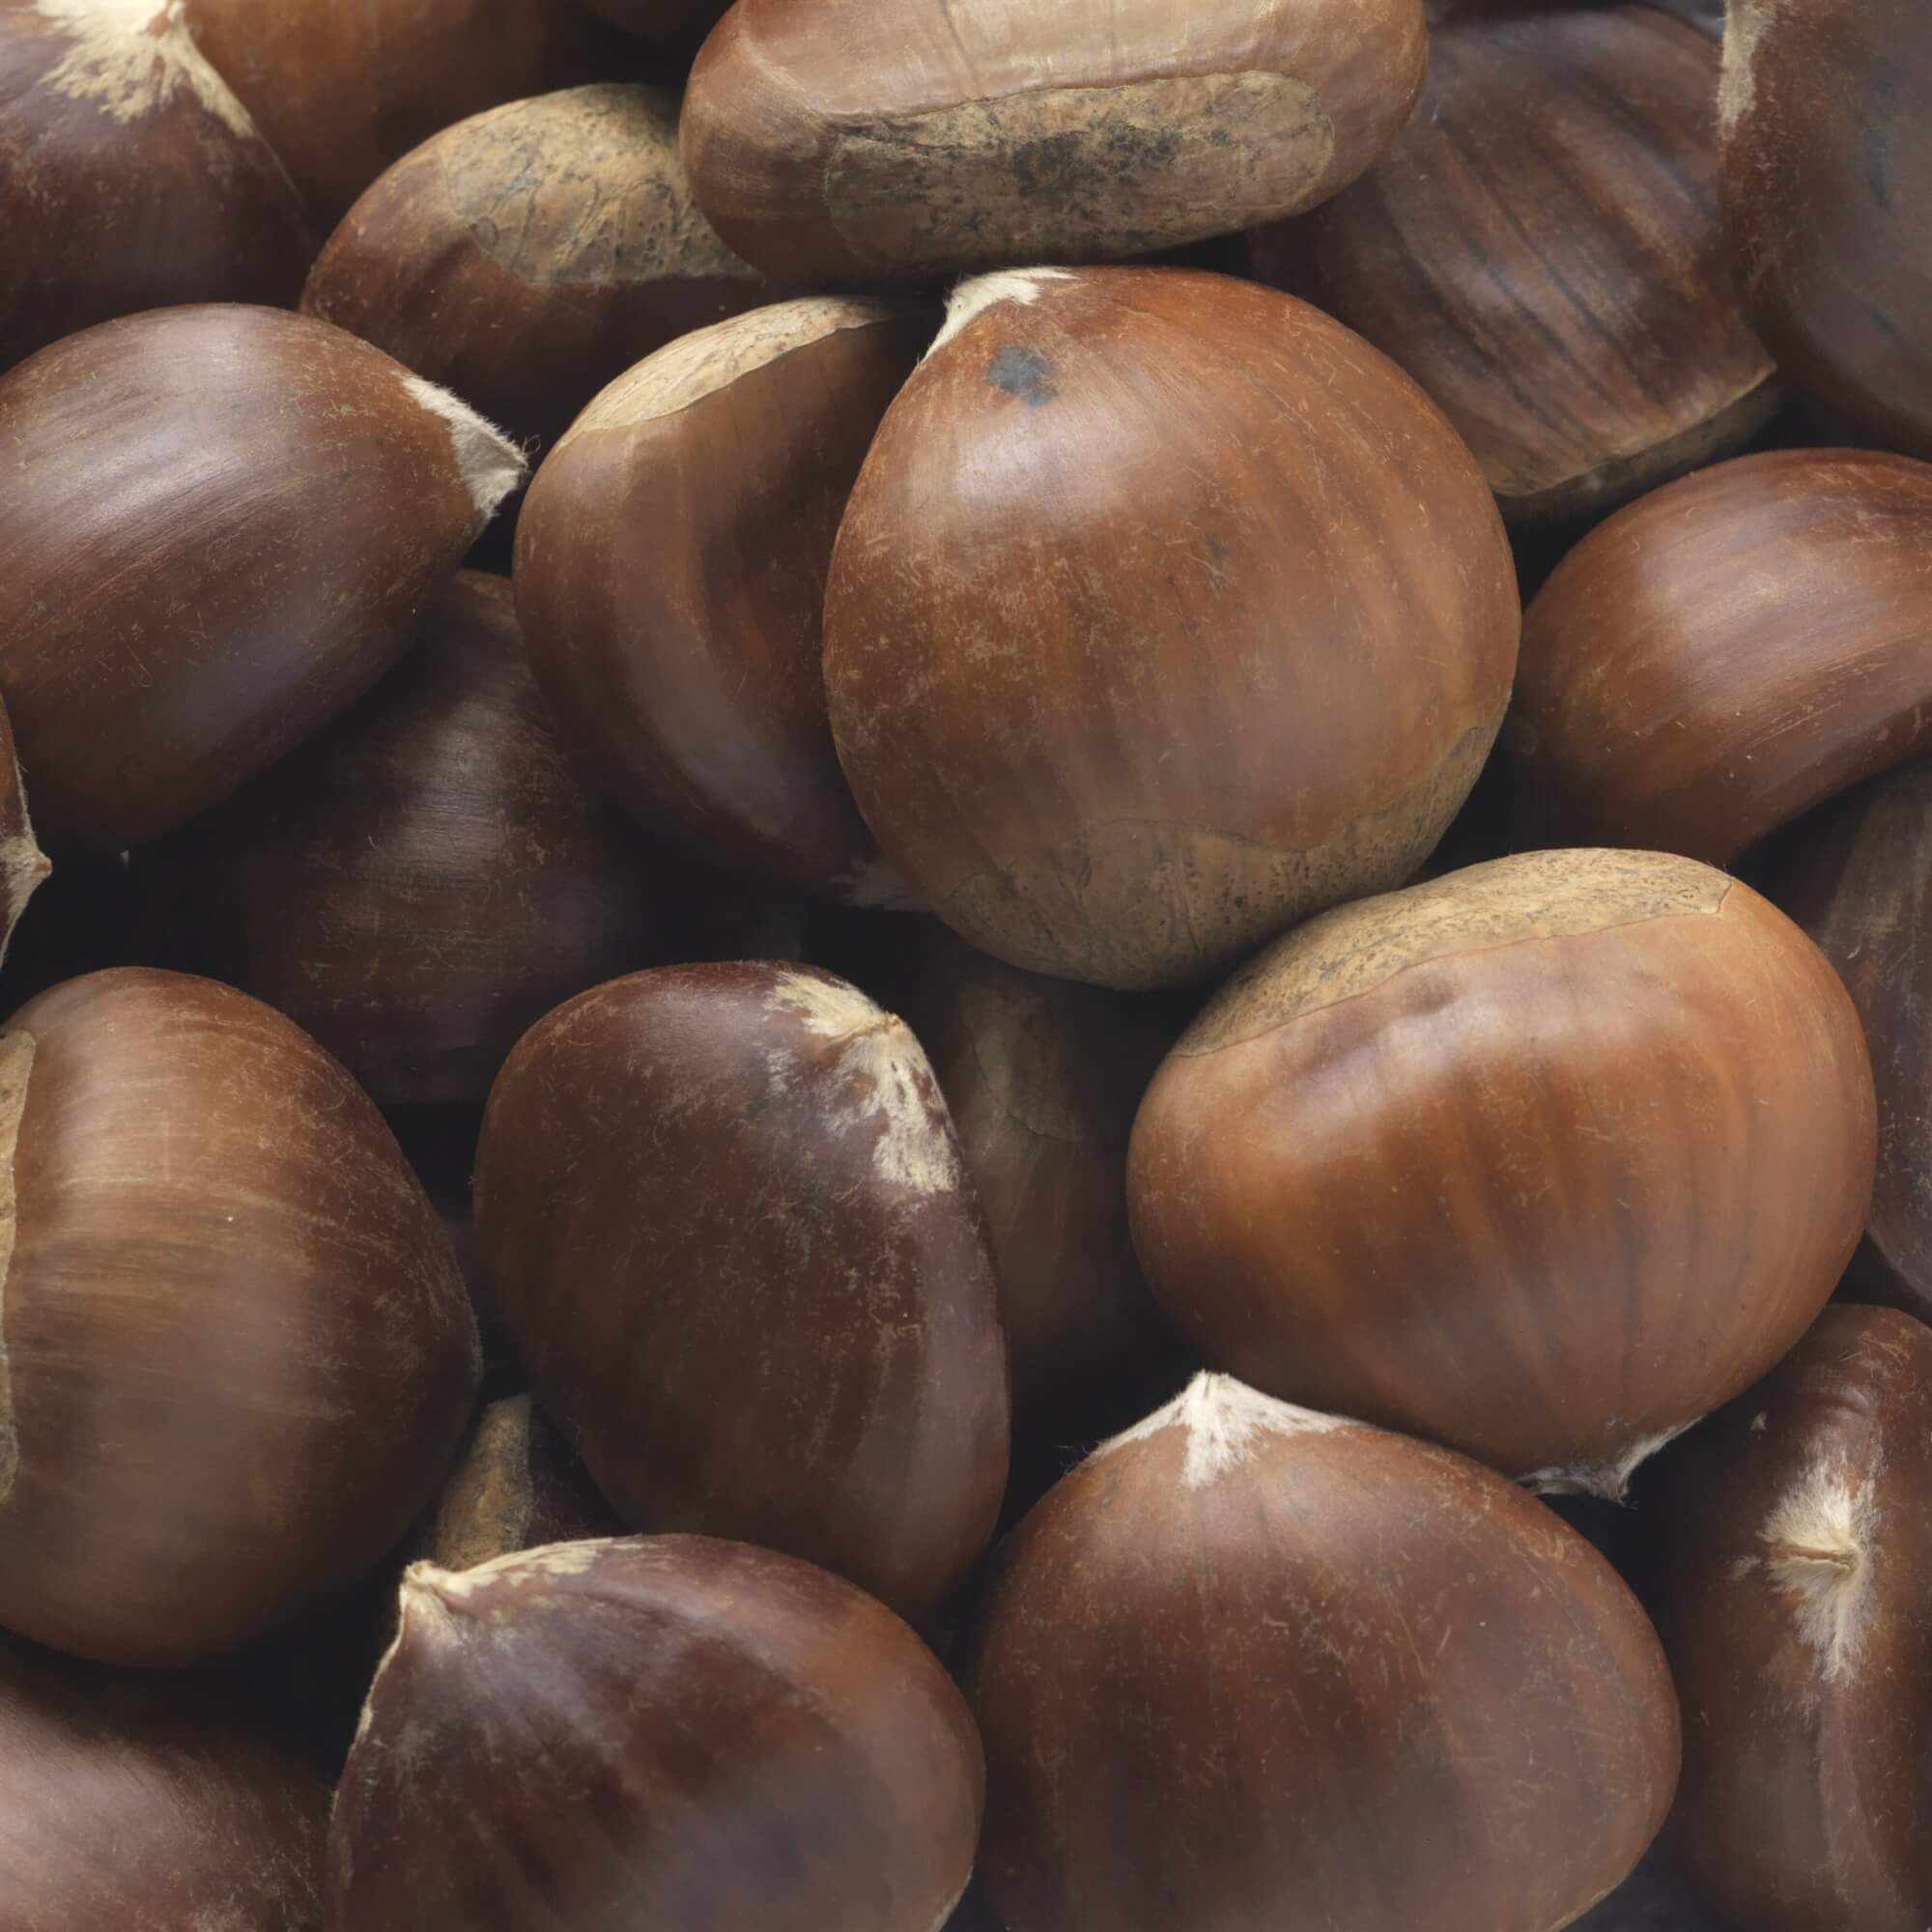 Chestnuts - A Chestnut is an edible nut often encased in a prickly husk and mainly grown in Spain, Italy and France.